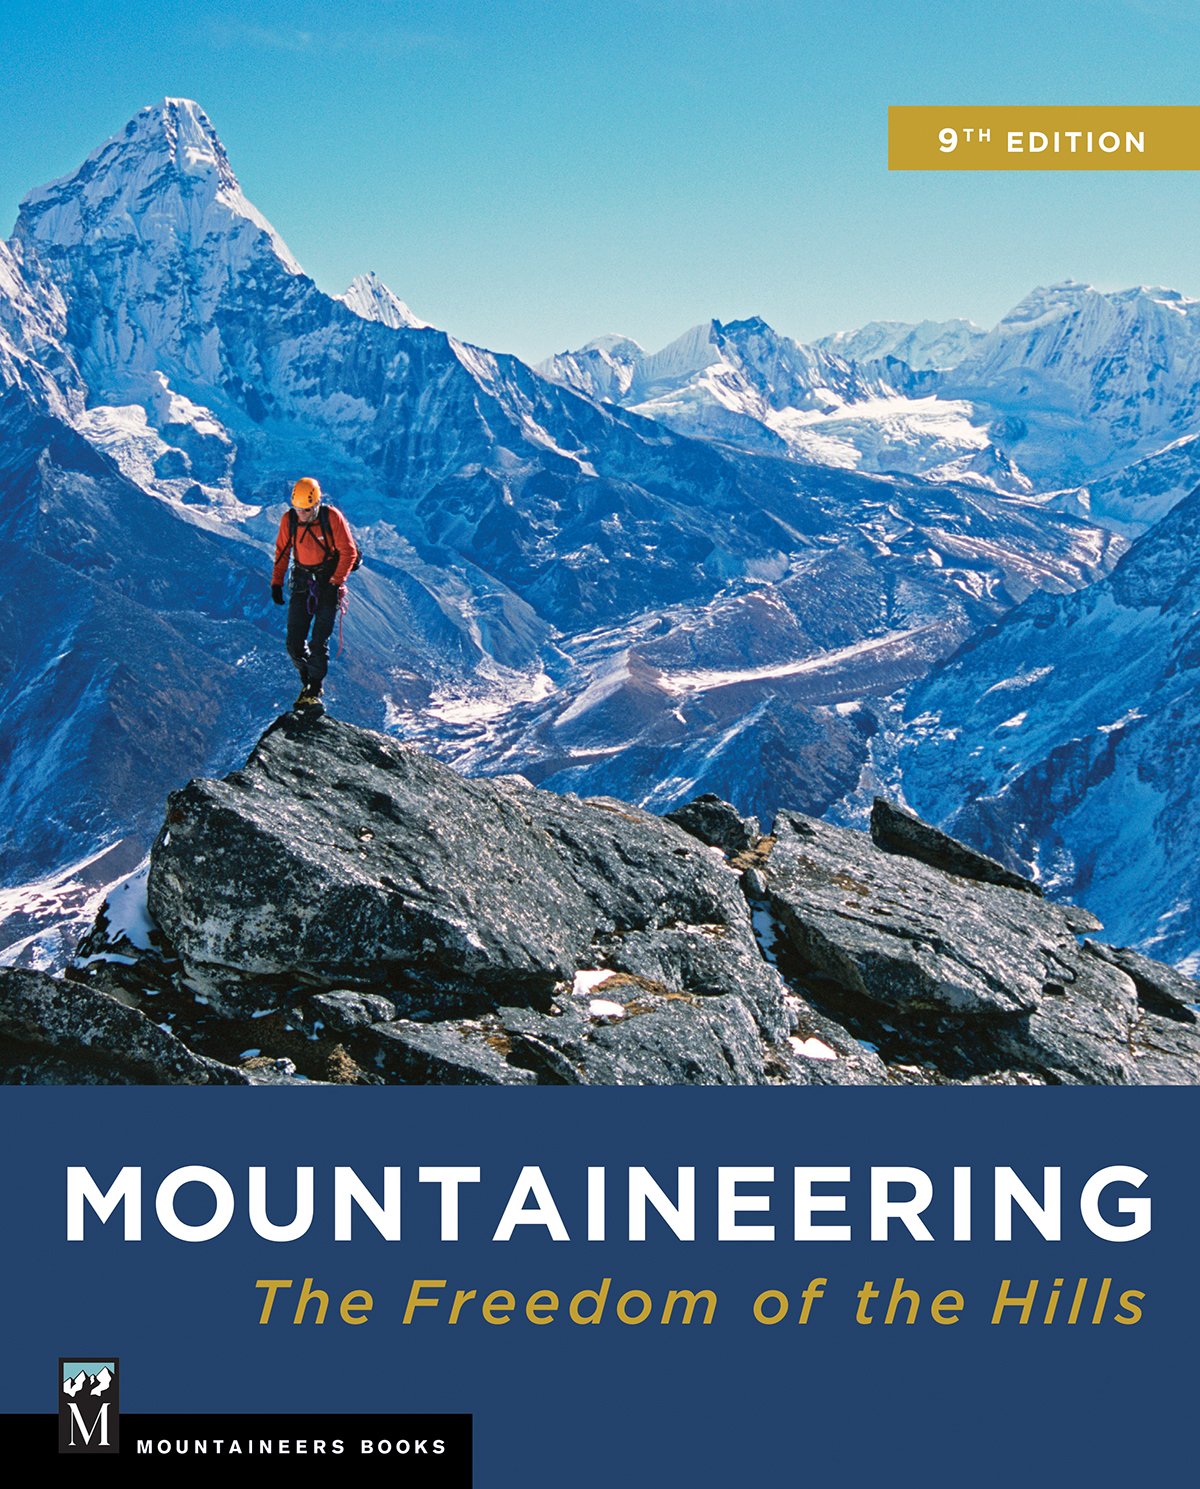 Mountaineering: Freedom of the Hills, 9th Edition